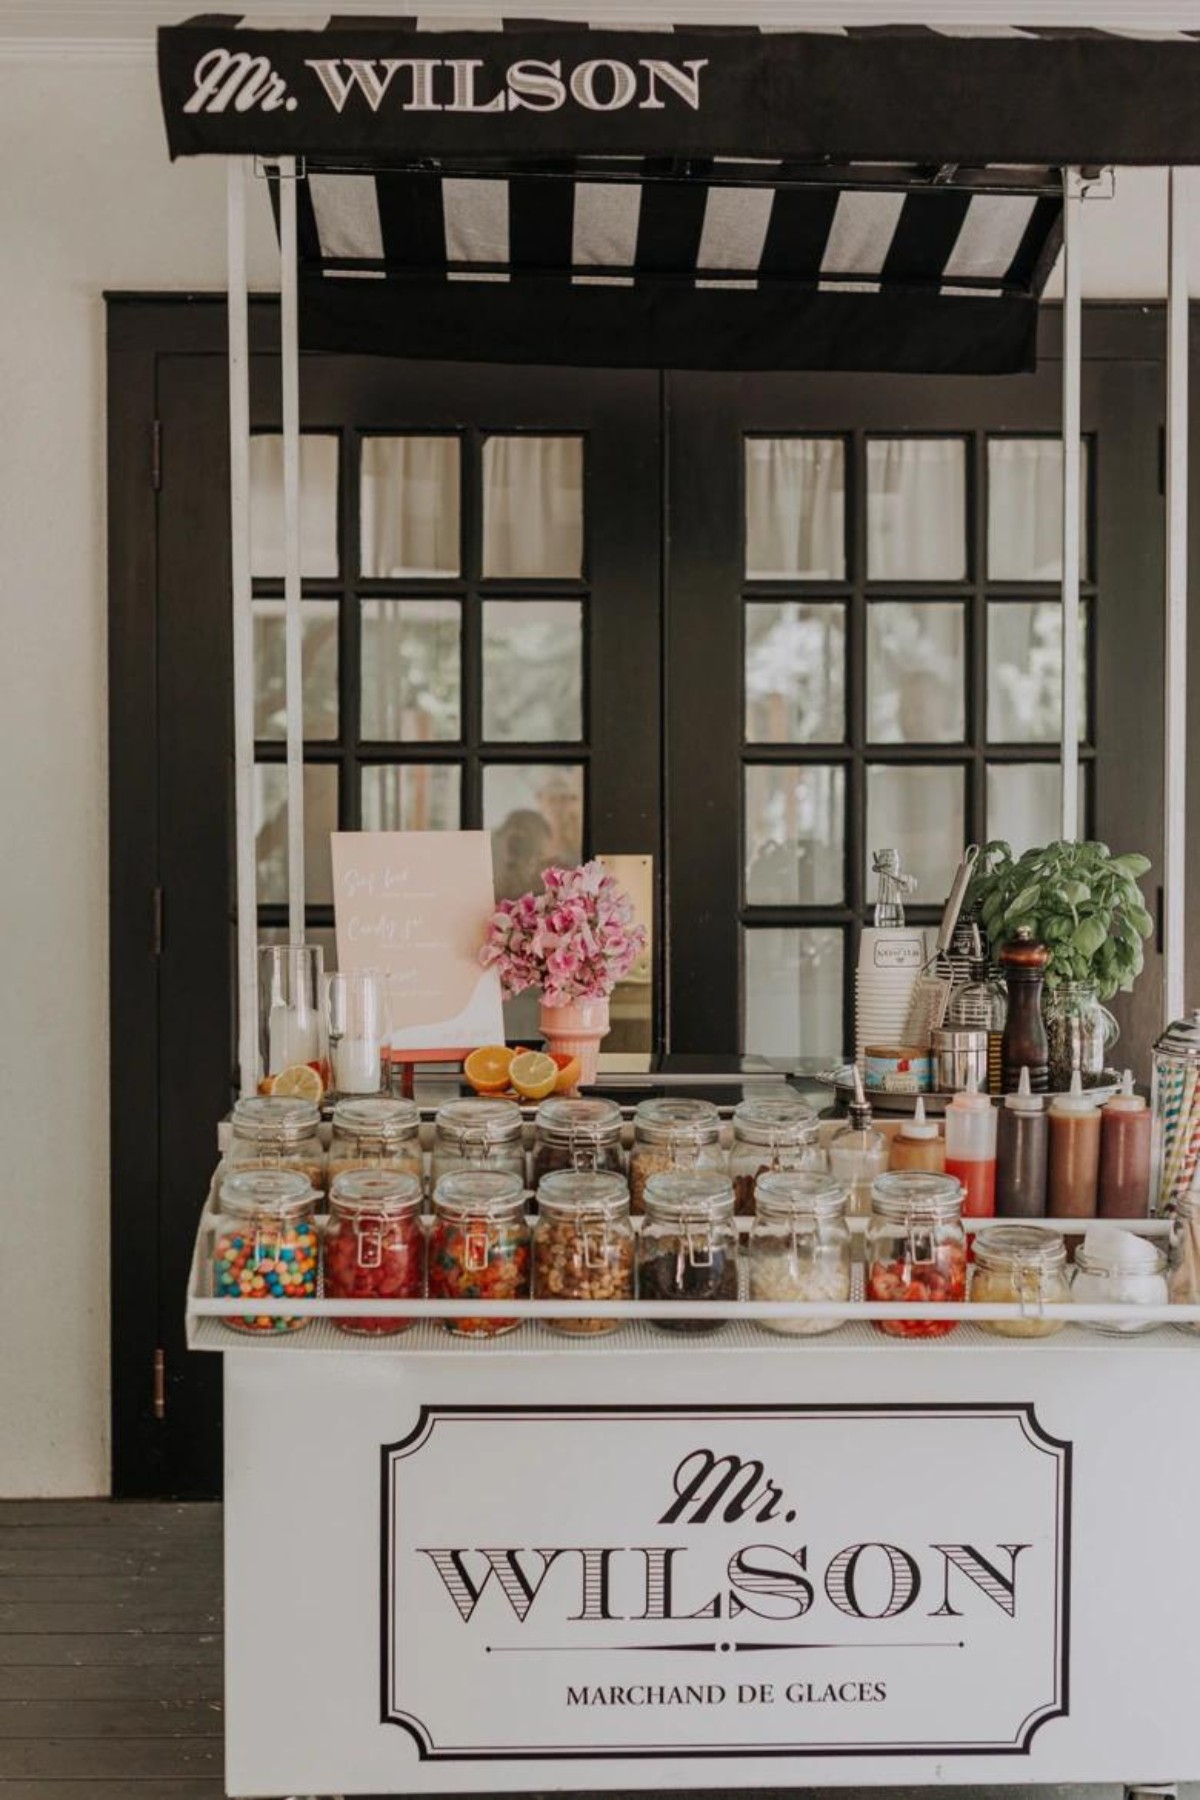 Wedding Catering Ideas Your Guests Will Love: Top 15